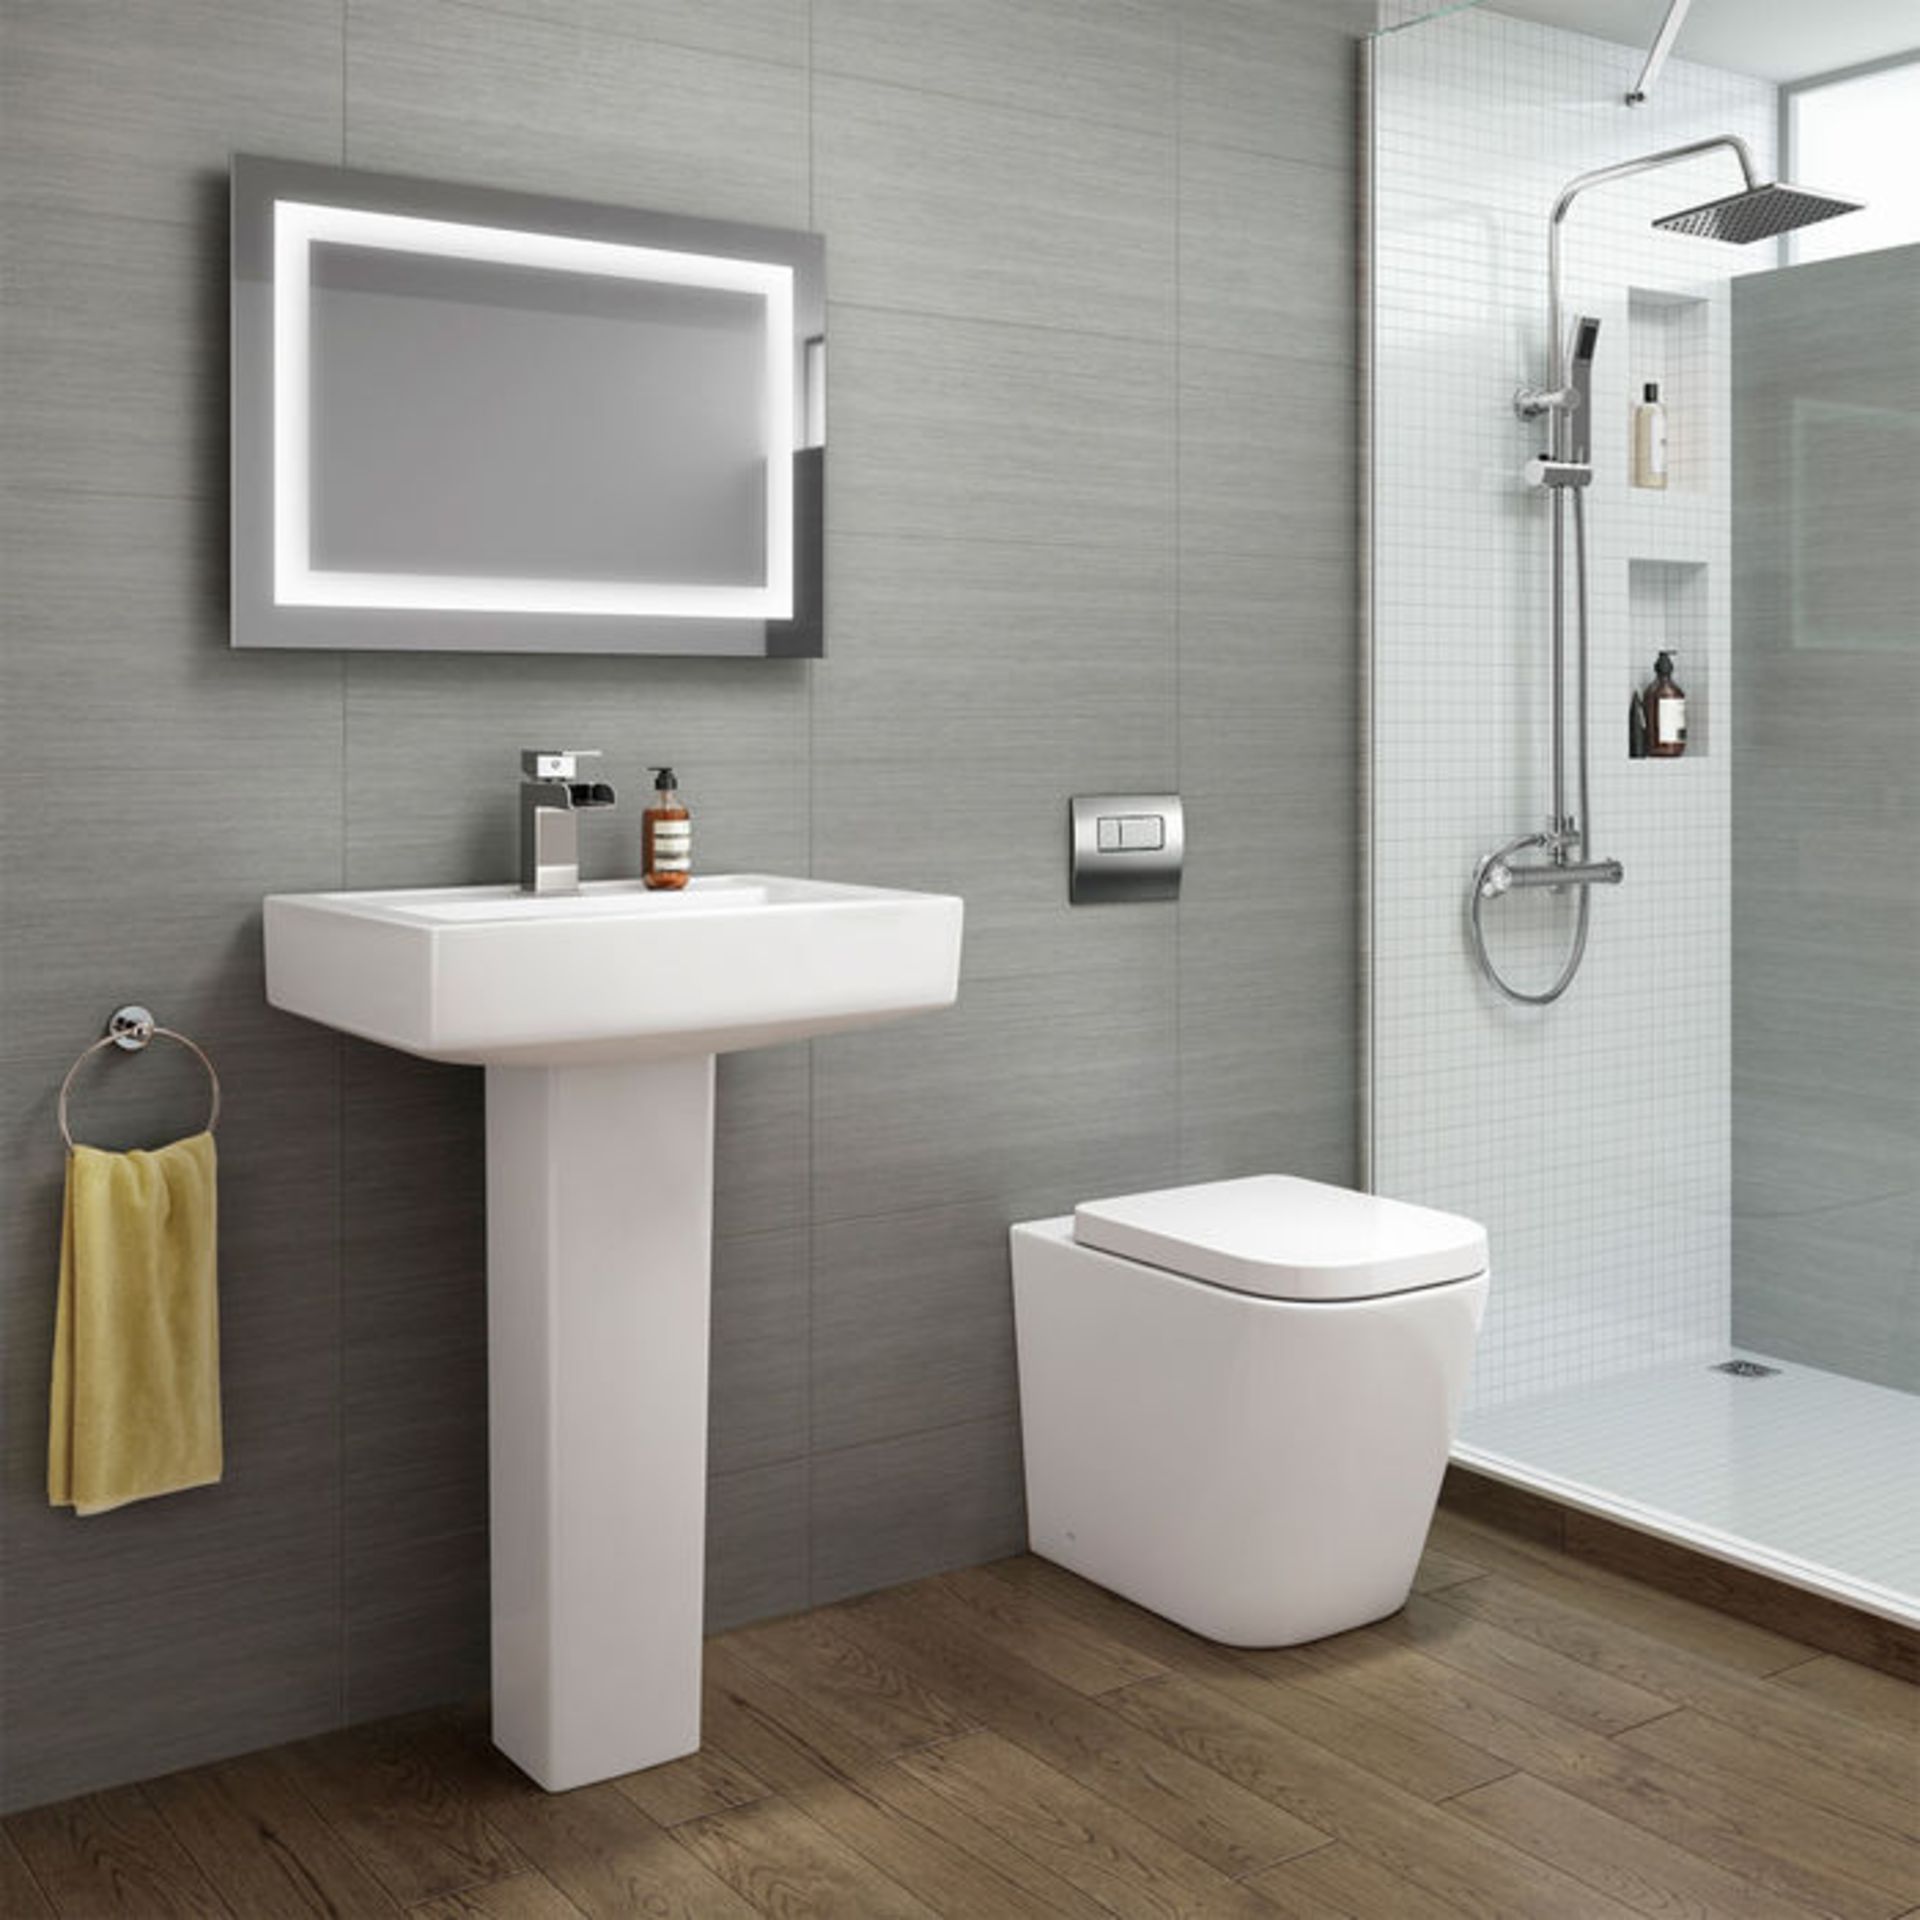 Florence Rimless Back to Wall Toilet inc Luxury Soft Close Seat Rimless design makes it easy t... - Image 2 of 2